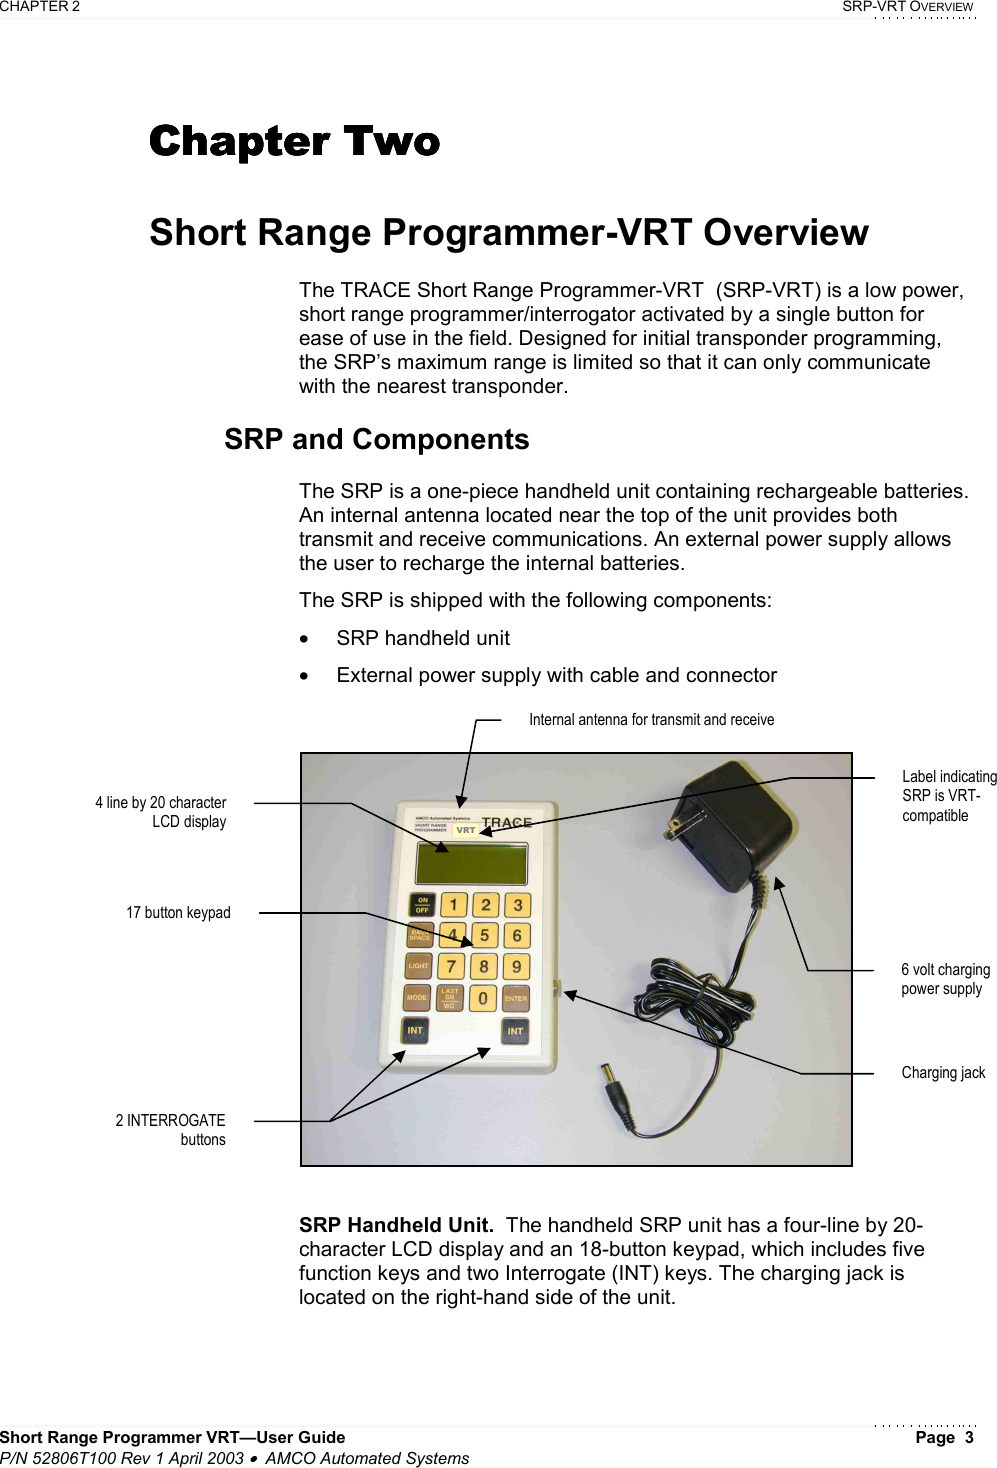 CHAPTER 2    SRP-VRT OVERVIEW Short Range Programmer VRT—User Guide    Page  3 P/N 52806T100 Rev 1 April 2003 •  AMCO Automated Systems  Chapter TwoChapter TwoChapter TwoChapter Two     Short Range Programmer-VRT Overview  The TRACE Short Range Programmer-VRT  (SRP-VRT) is a low power, short range programmer/interrogator activated by a single button for ease of use in the field. Designed for initial transponder programming, the SRP’s maximum range is limited so that it can only communicate with the nearest transponder.  SRP and Components  The SRP is a one-piece handheld unit containing rechargeable batteries. An internal antenna located near the top of the unit provides both transmit and receive communications. An external power supply allows the user to recharge the internal batteries.  The SRP is shipped with the following components: •  SRP handheld unit •  External power supply with cable and connector   SRP Handheld Unit.  The handheld SRP unit has a four-line by 20-character LCD display and an 18-button keypad, which includes five function keys and two Interrogate (INT) keys. The charging jack is located on the right-hand side of the unit.  4 line by 20 character LCD display 17 button keypadCharging jack 6 volt charging power supply Internal antenna for transmit and receive 2 INTERROGATE buttons VRTLabel indicating SRP is VRT-compatible 